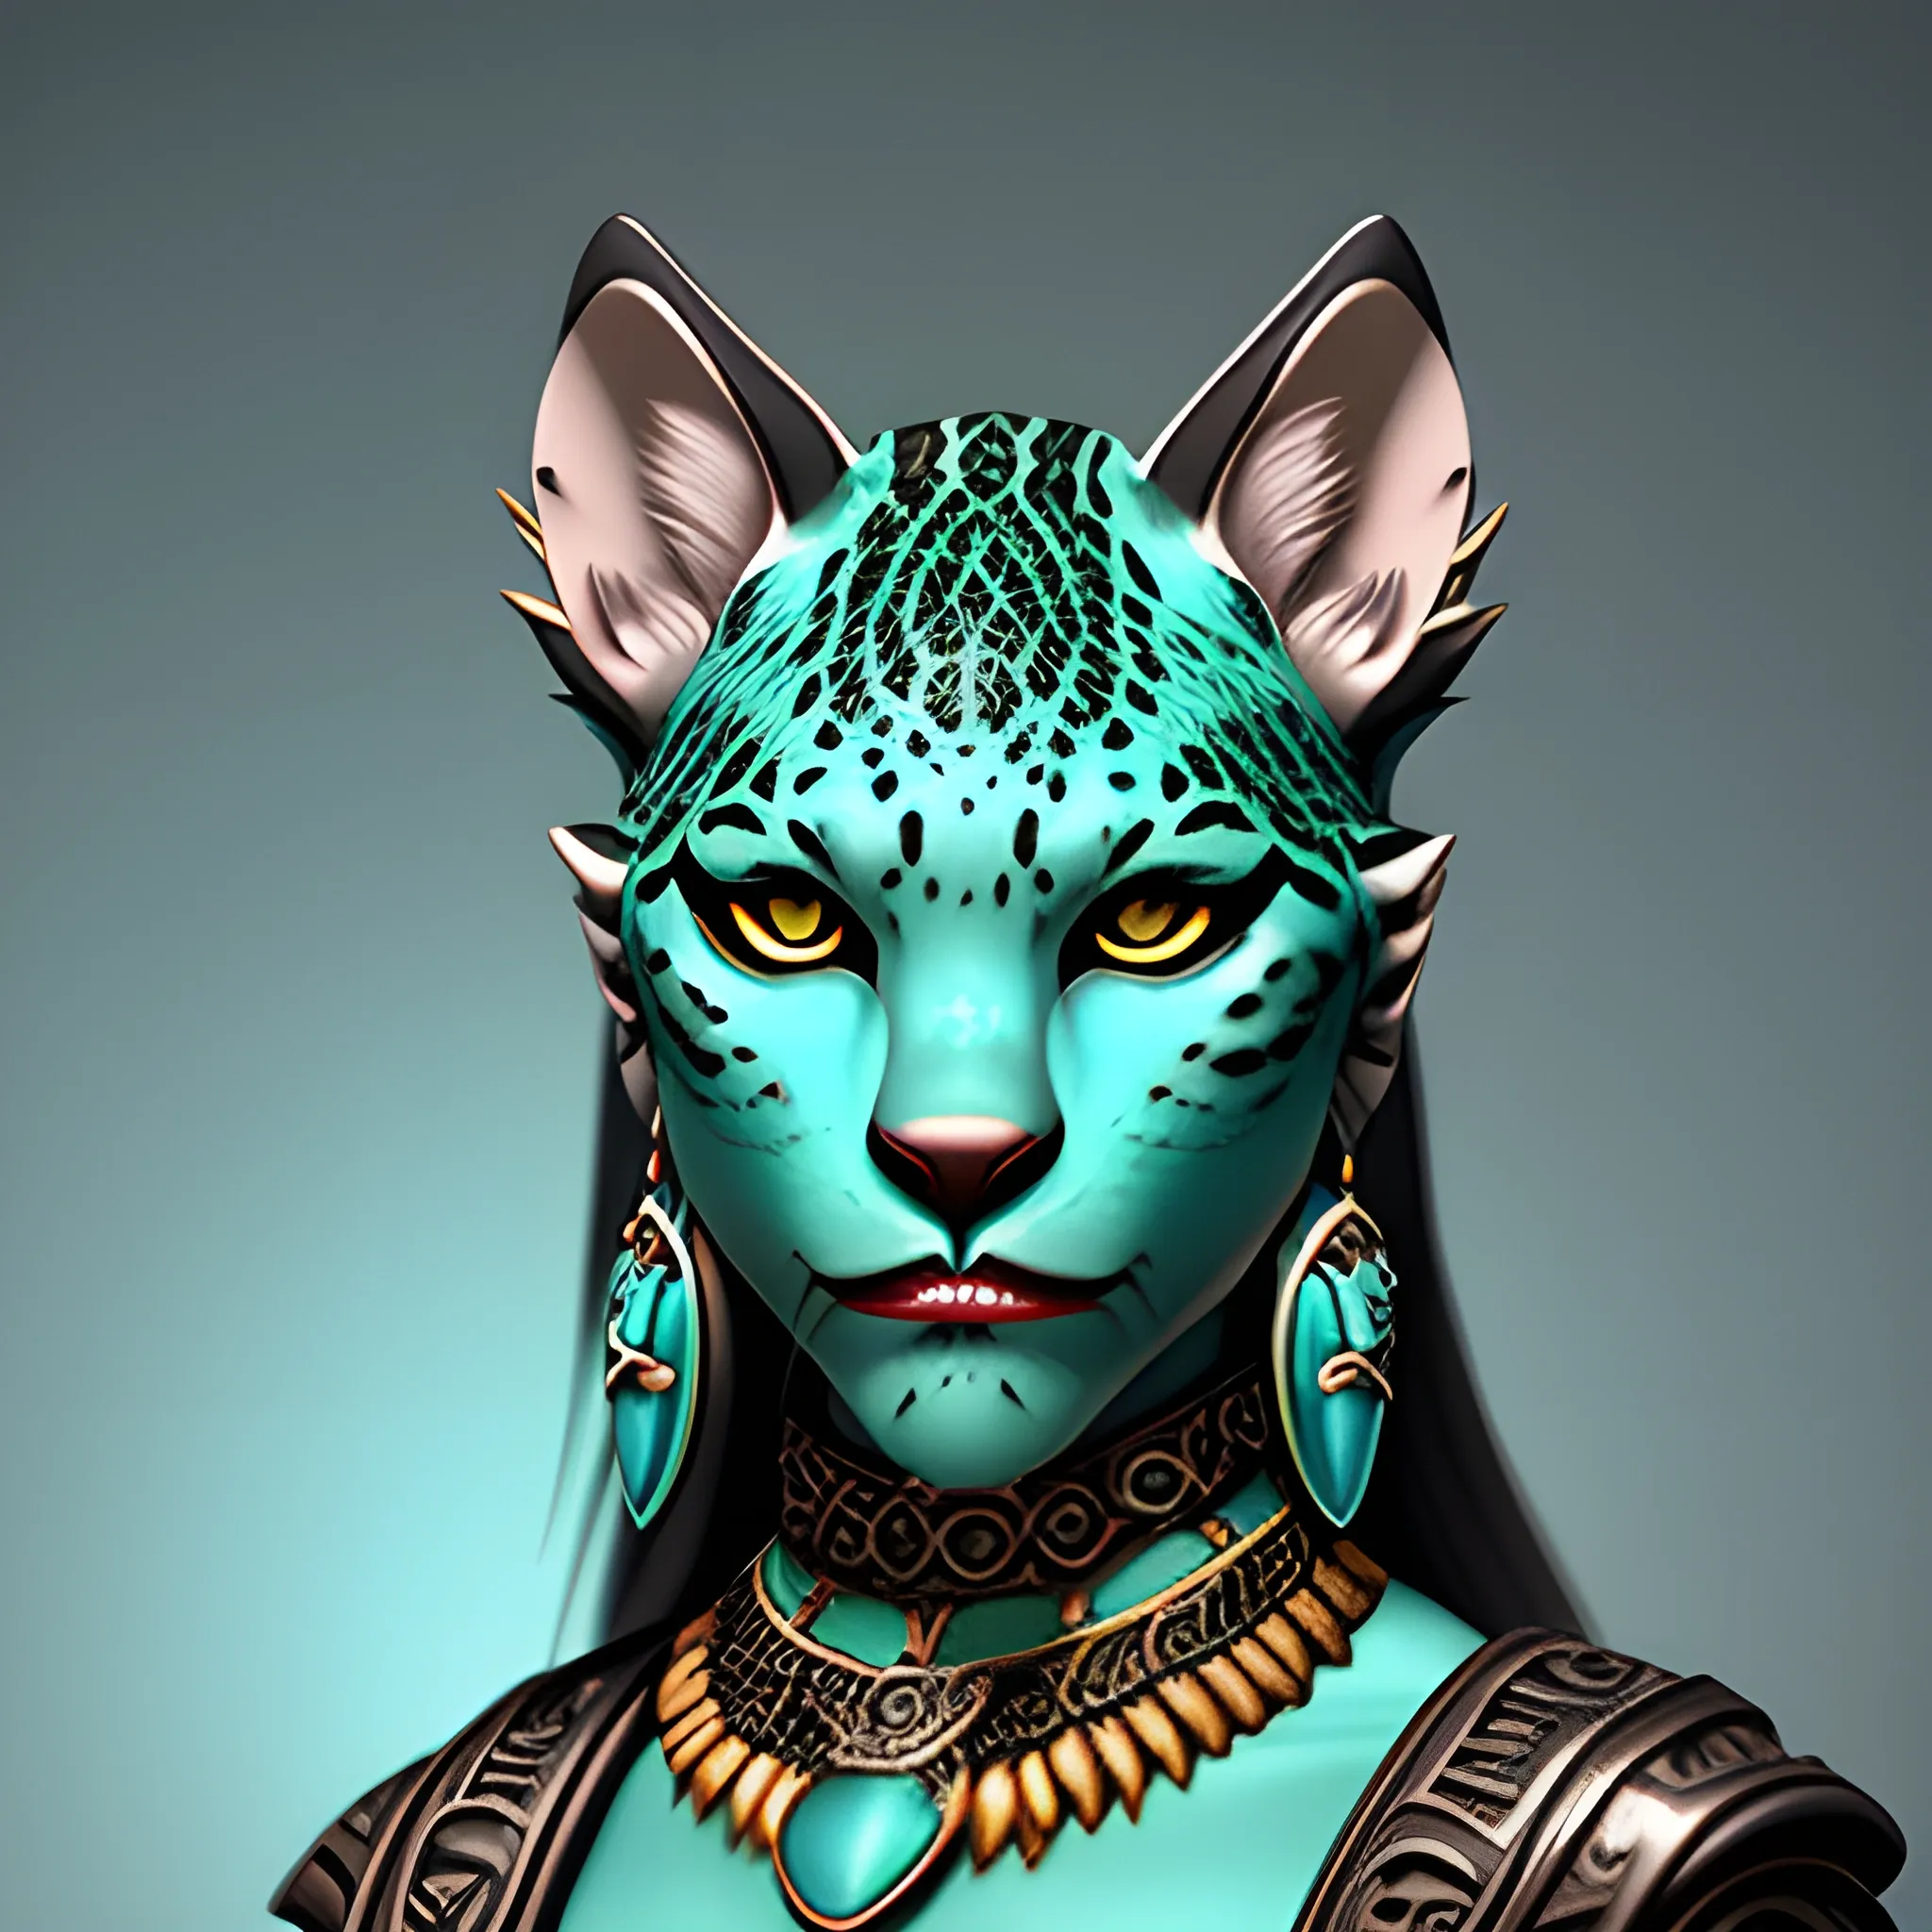 photorealistic dnd jaguar anthropomorphic female dungeons and dragons jaguar tabaxi female pierced ears turquoise jewelry, jade accessories, 